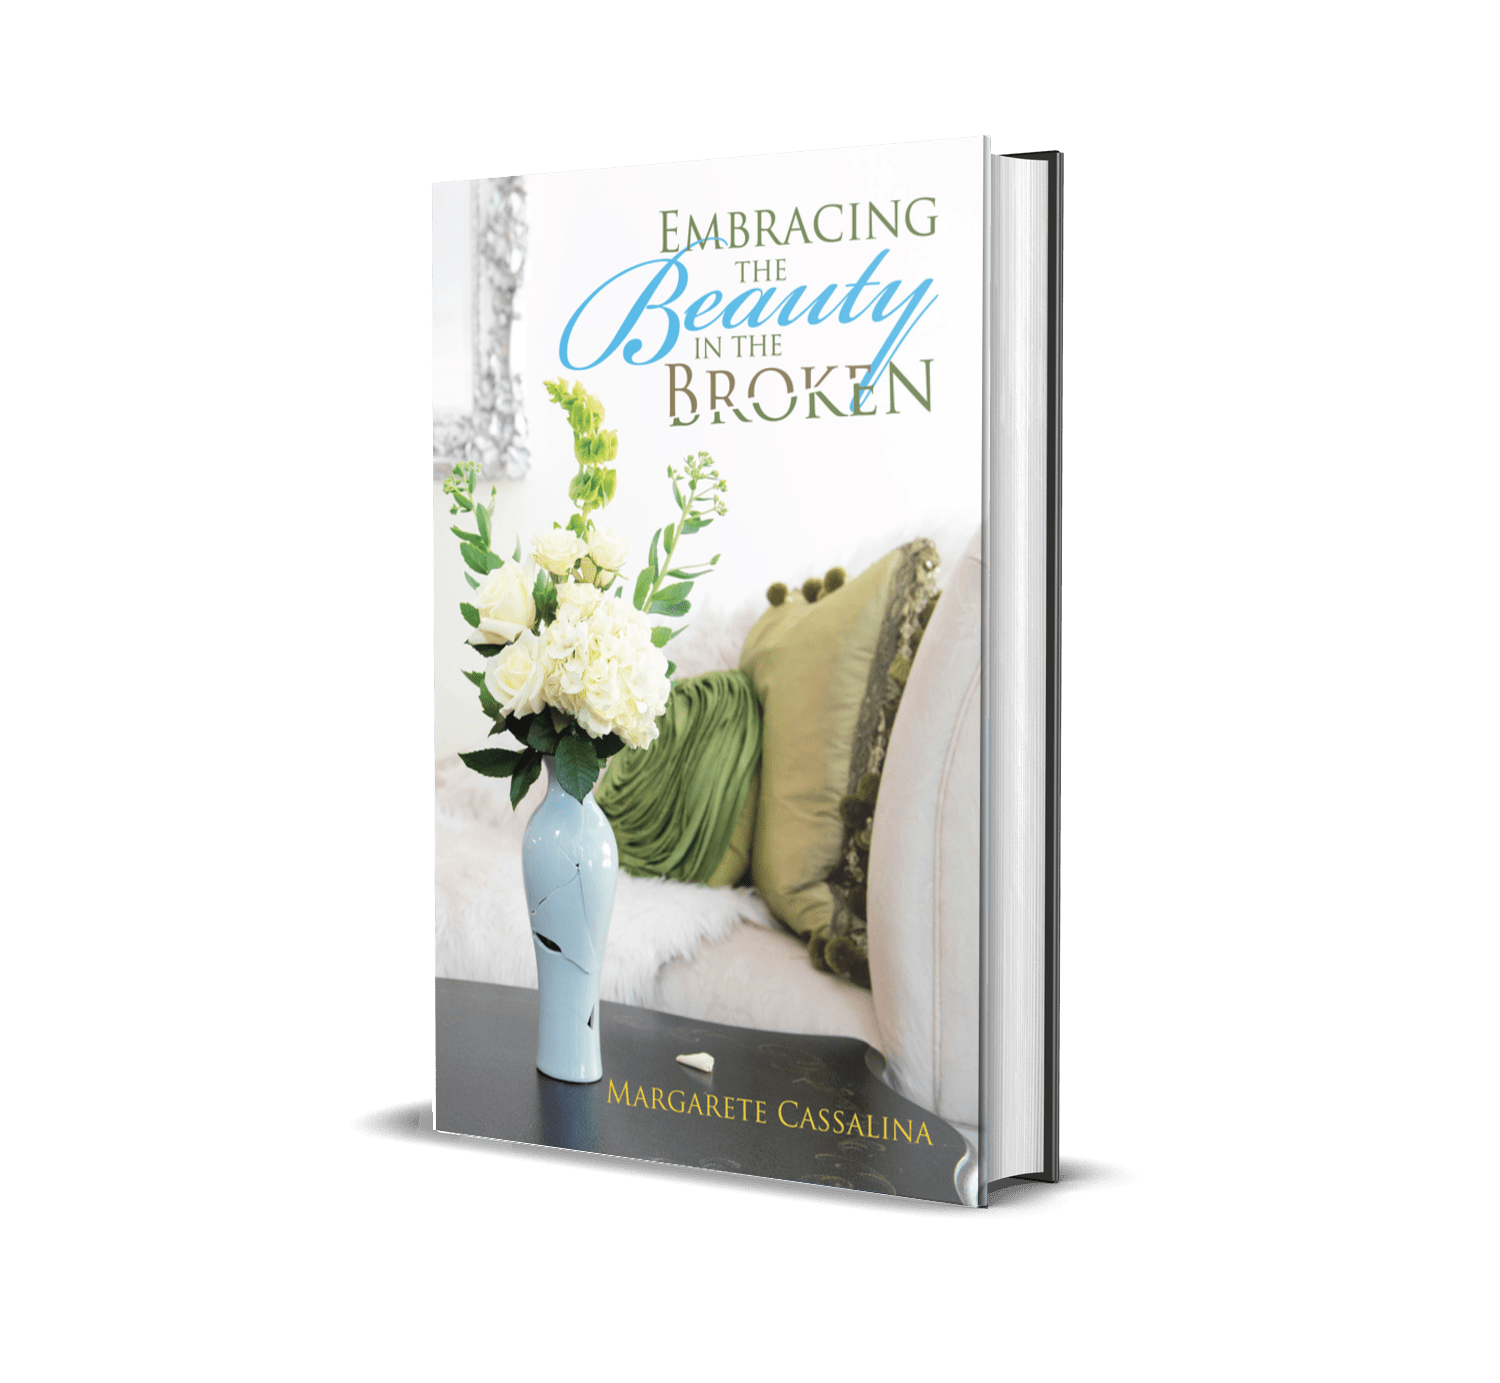 The Embracing the Beaty in the Broken book cover shows a cracked vase with white flowers in front of an elegant sofa.